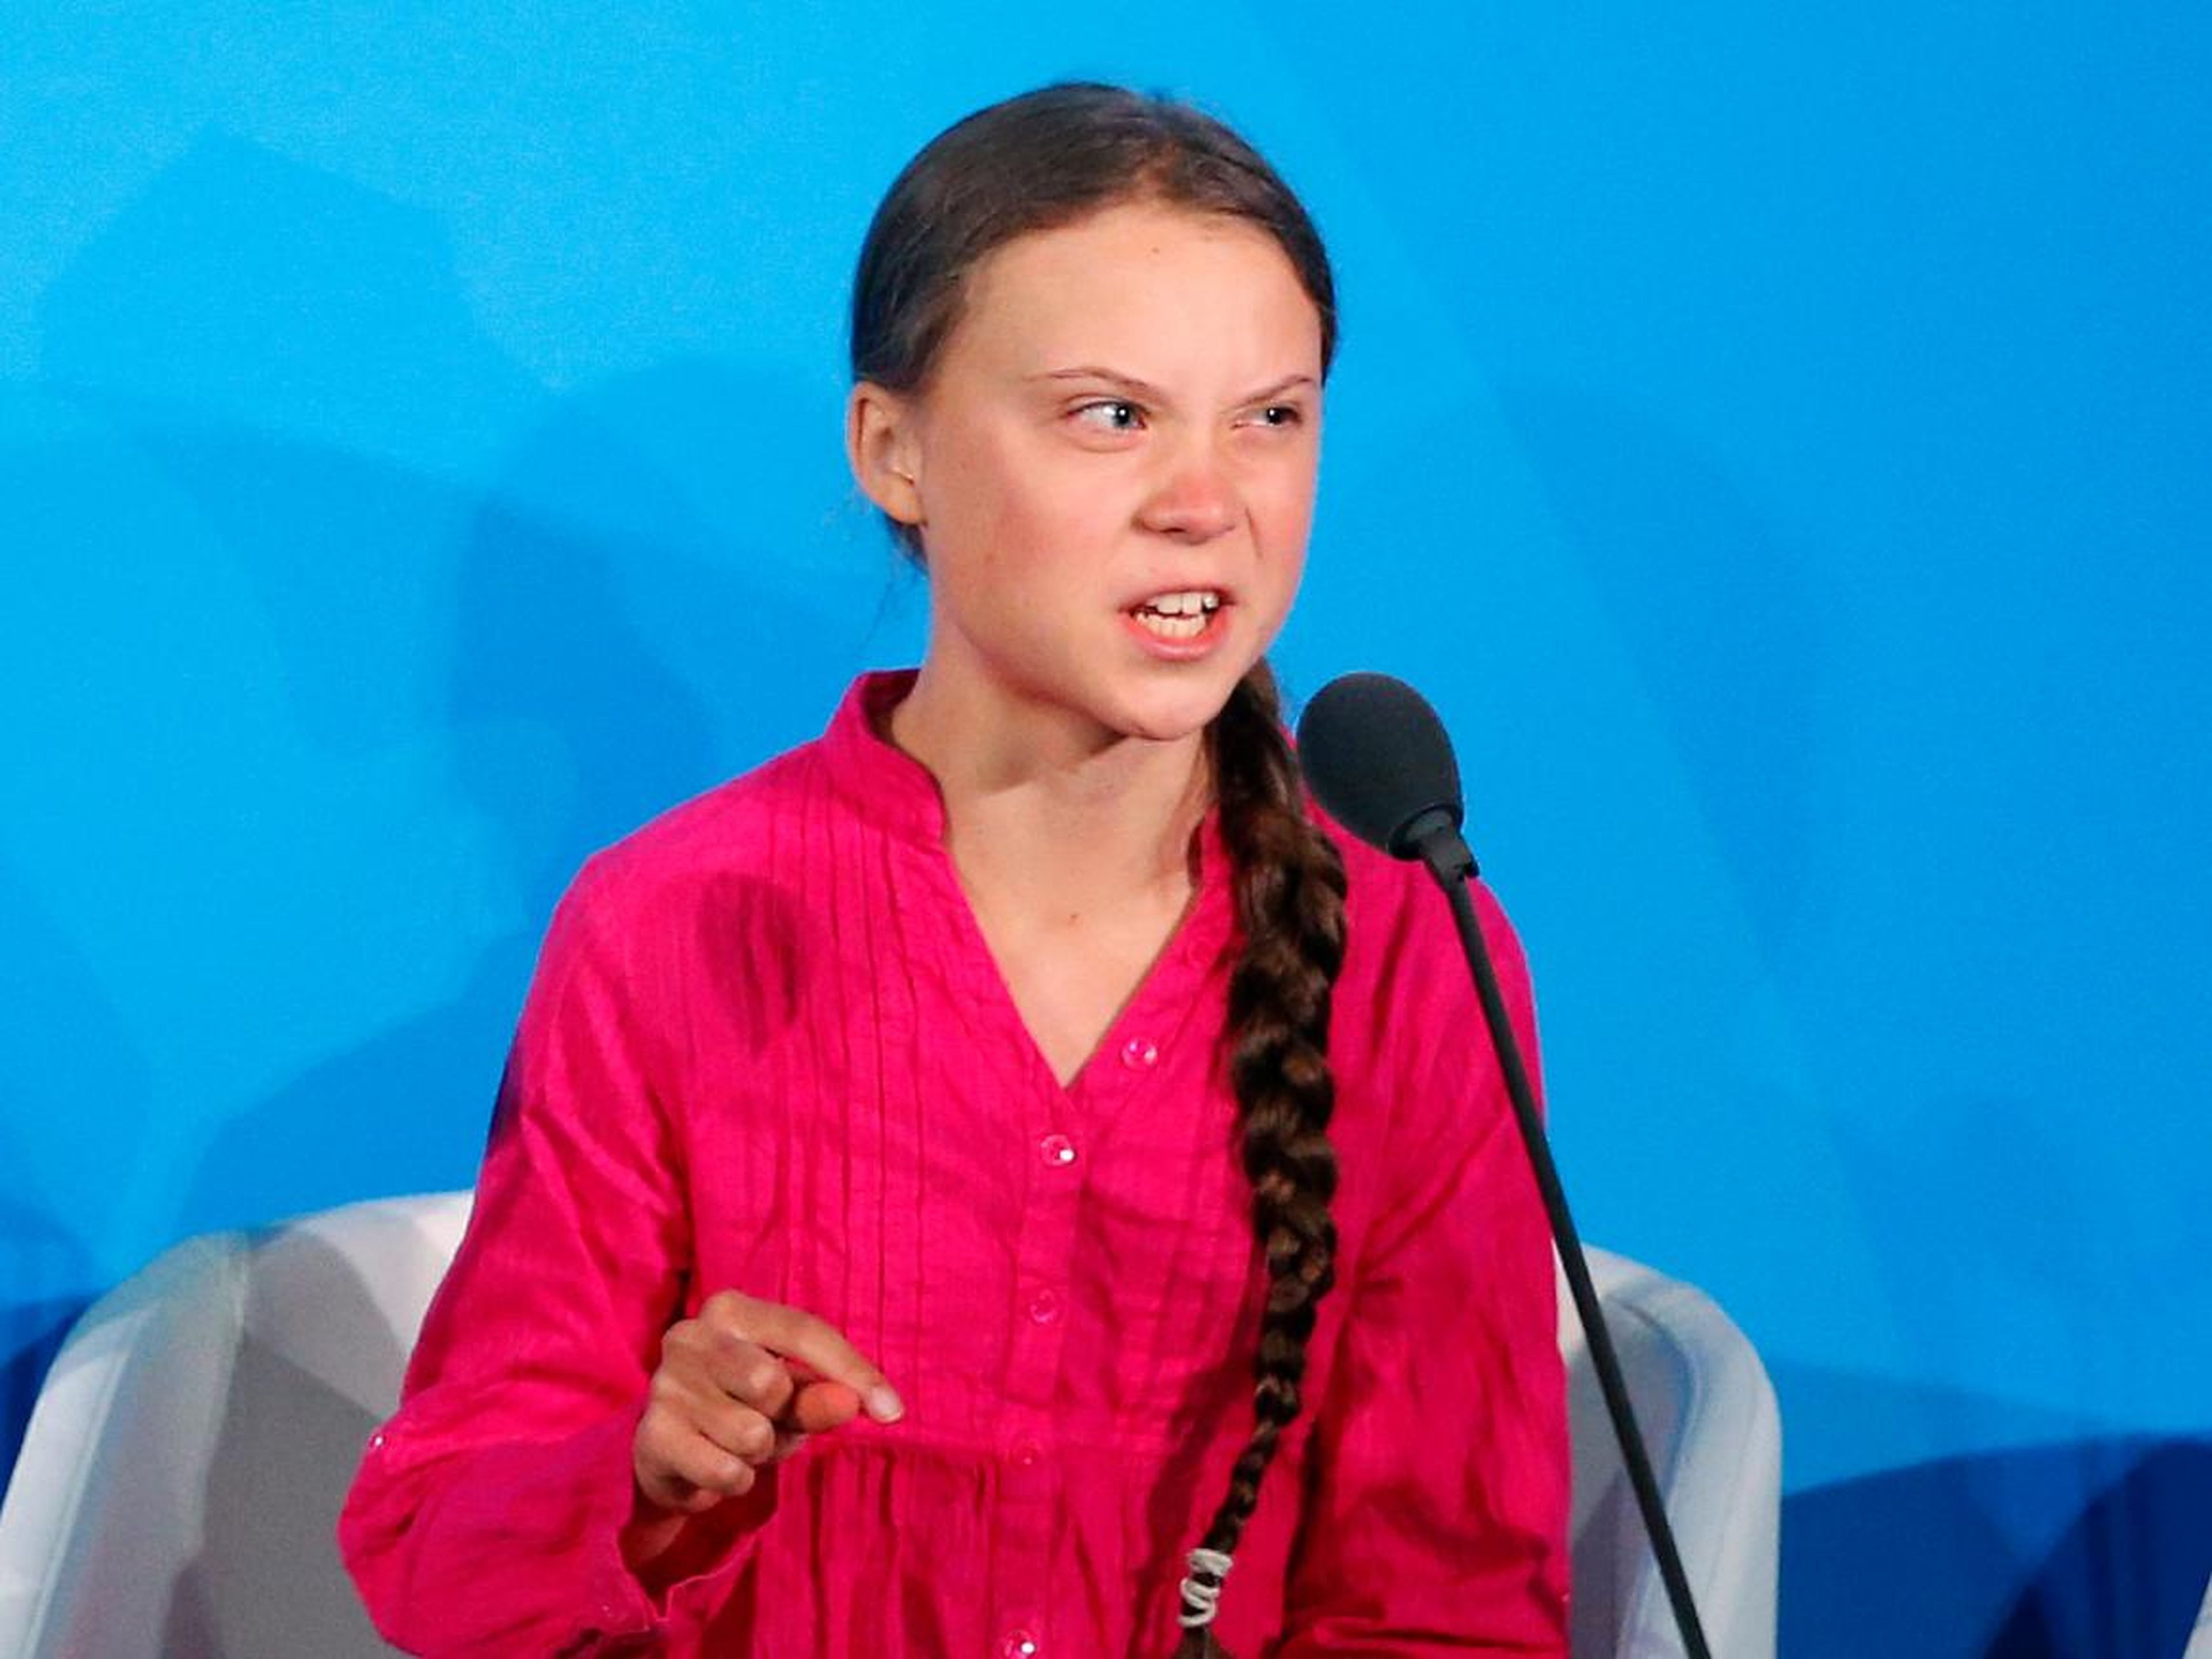 Greta Thunberg addresses the Climate Action Summit in the United Nations General Assembly, at UN headquarters, Monday, Sept. 23, 2019.